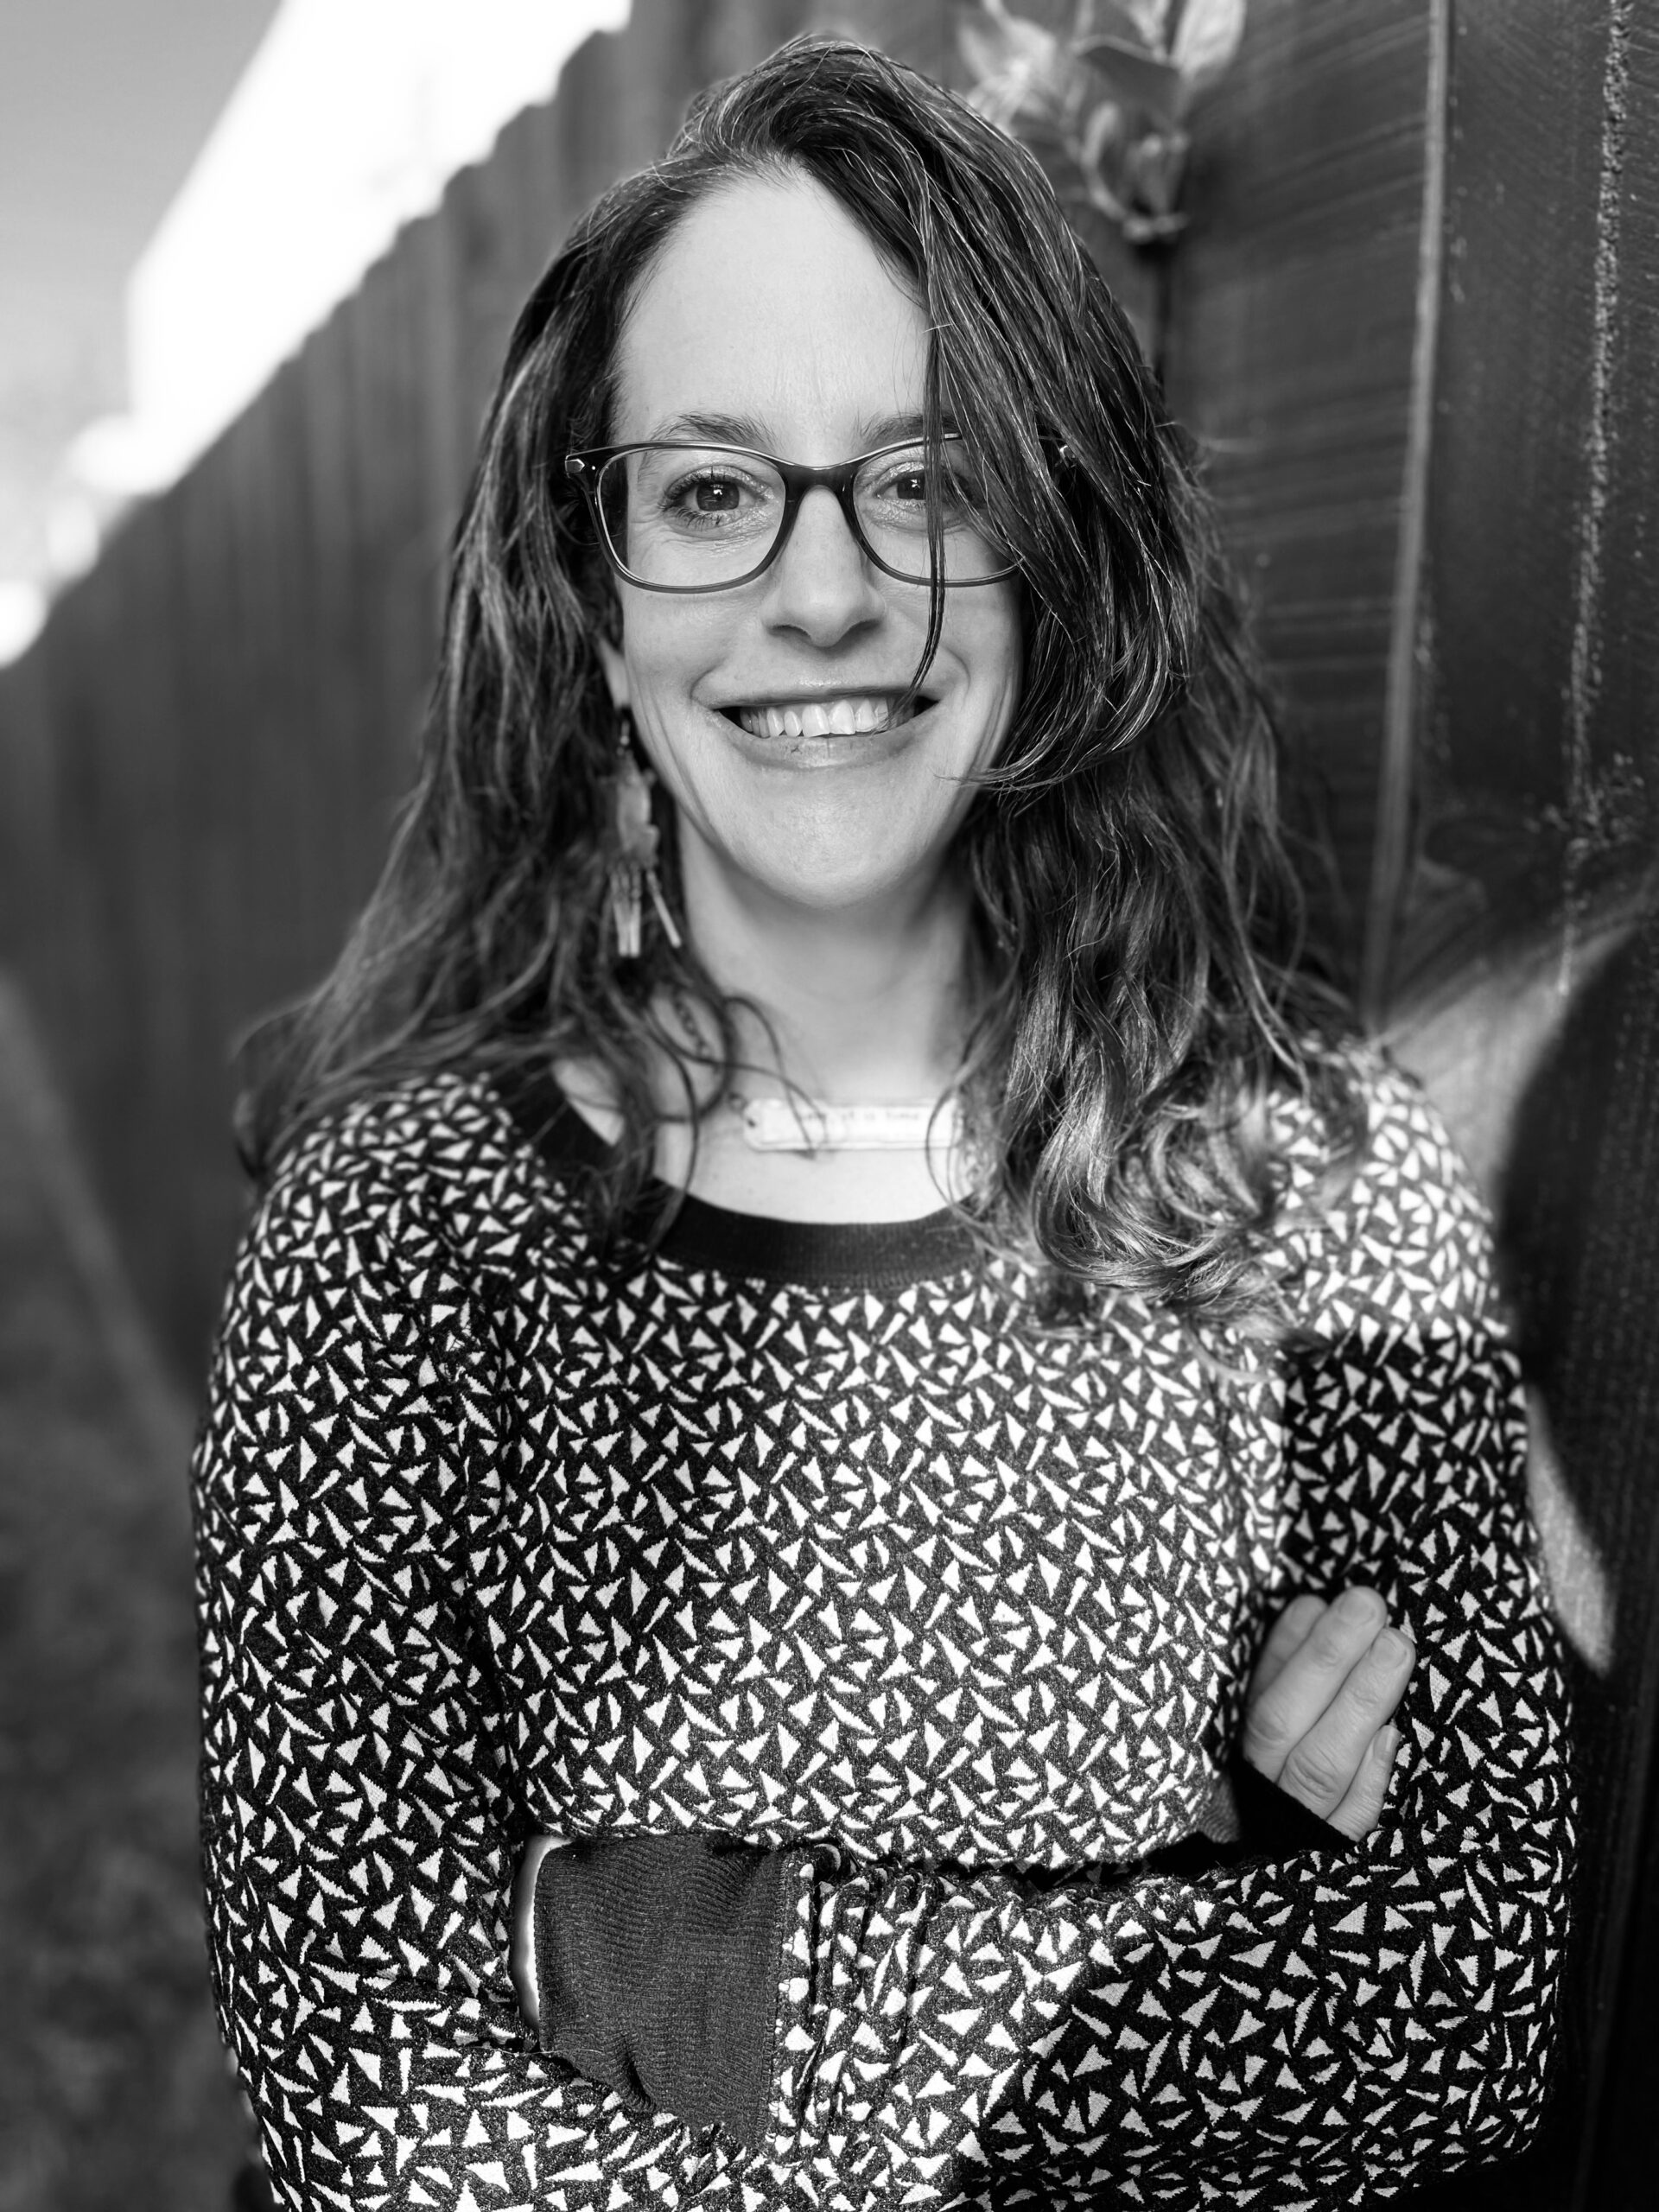 Reagan Louise Wilson in a black and white photo taken outside in front of a fence. She is smiling, wearing glasses and a patterned top.